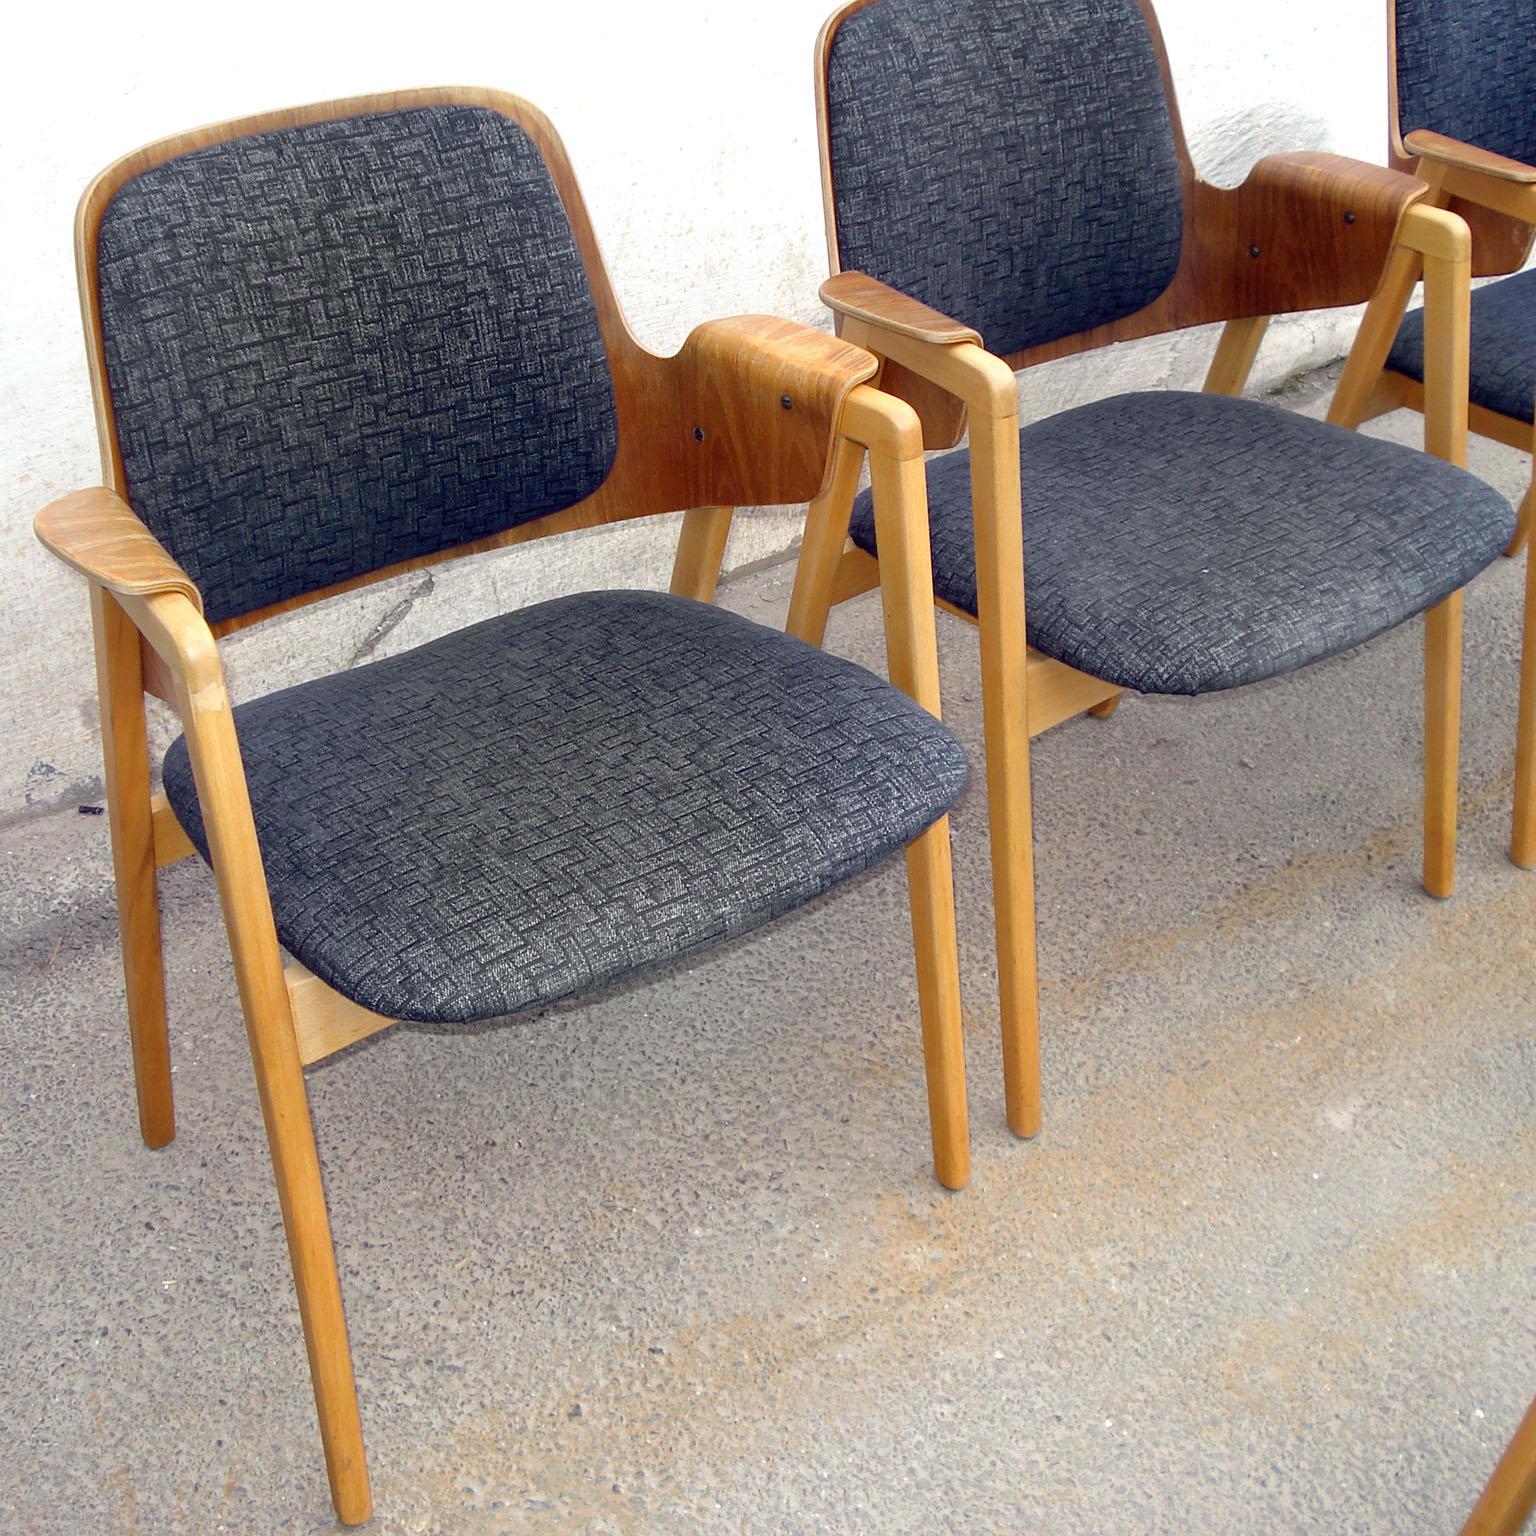 Set of 4 Elias Barup Teak Dining Chairs with Original Upholstery, 1950s Sweden For Sale 6